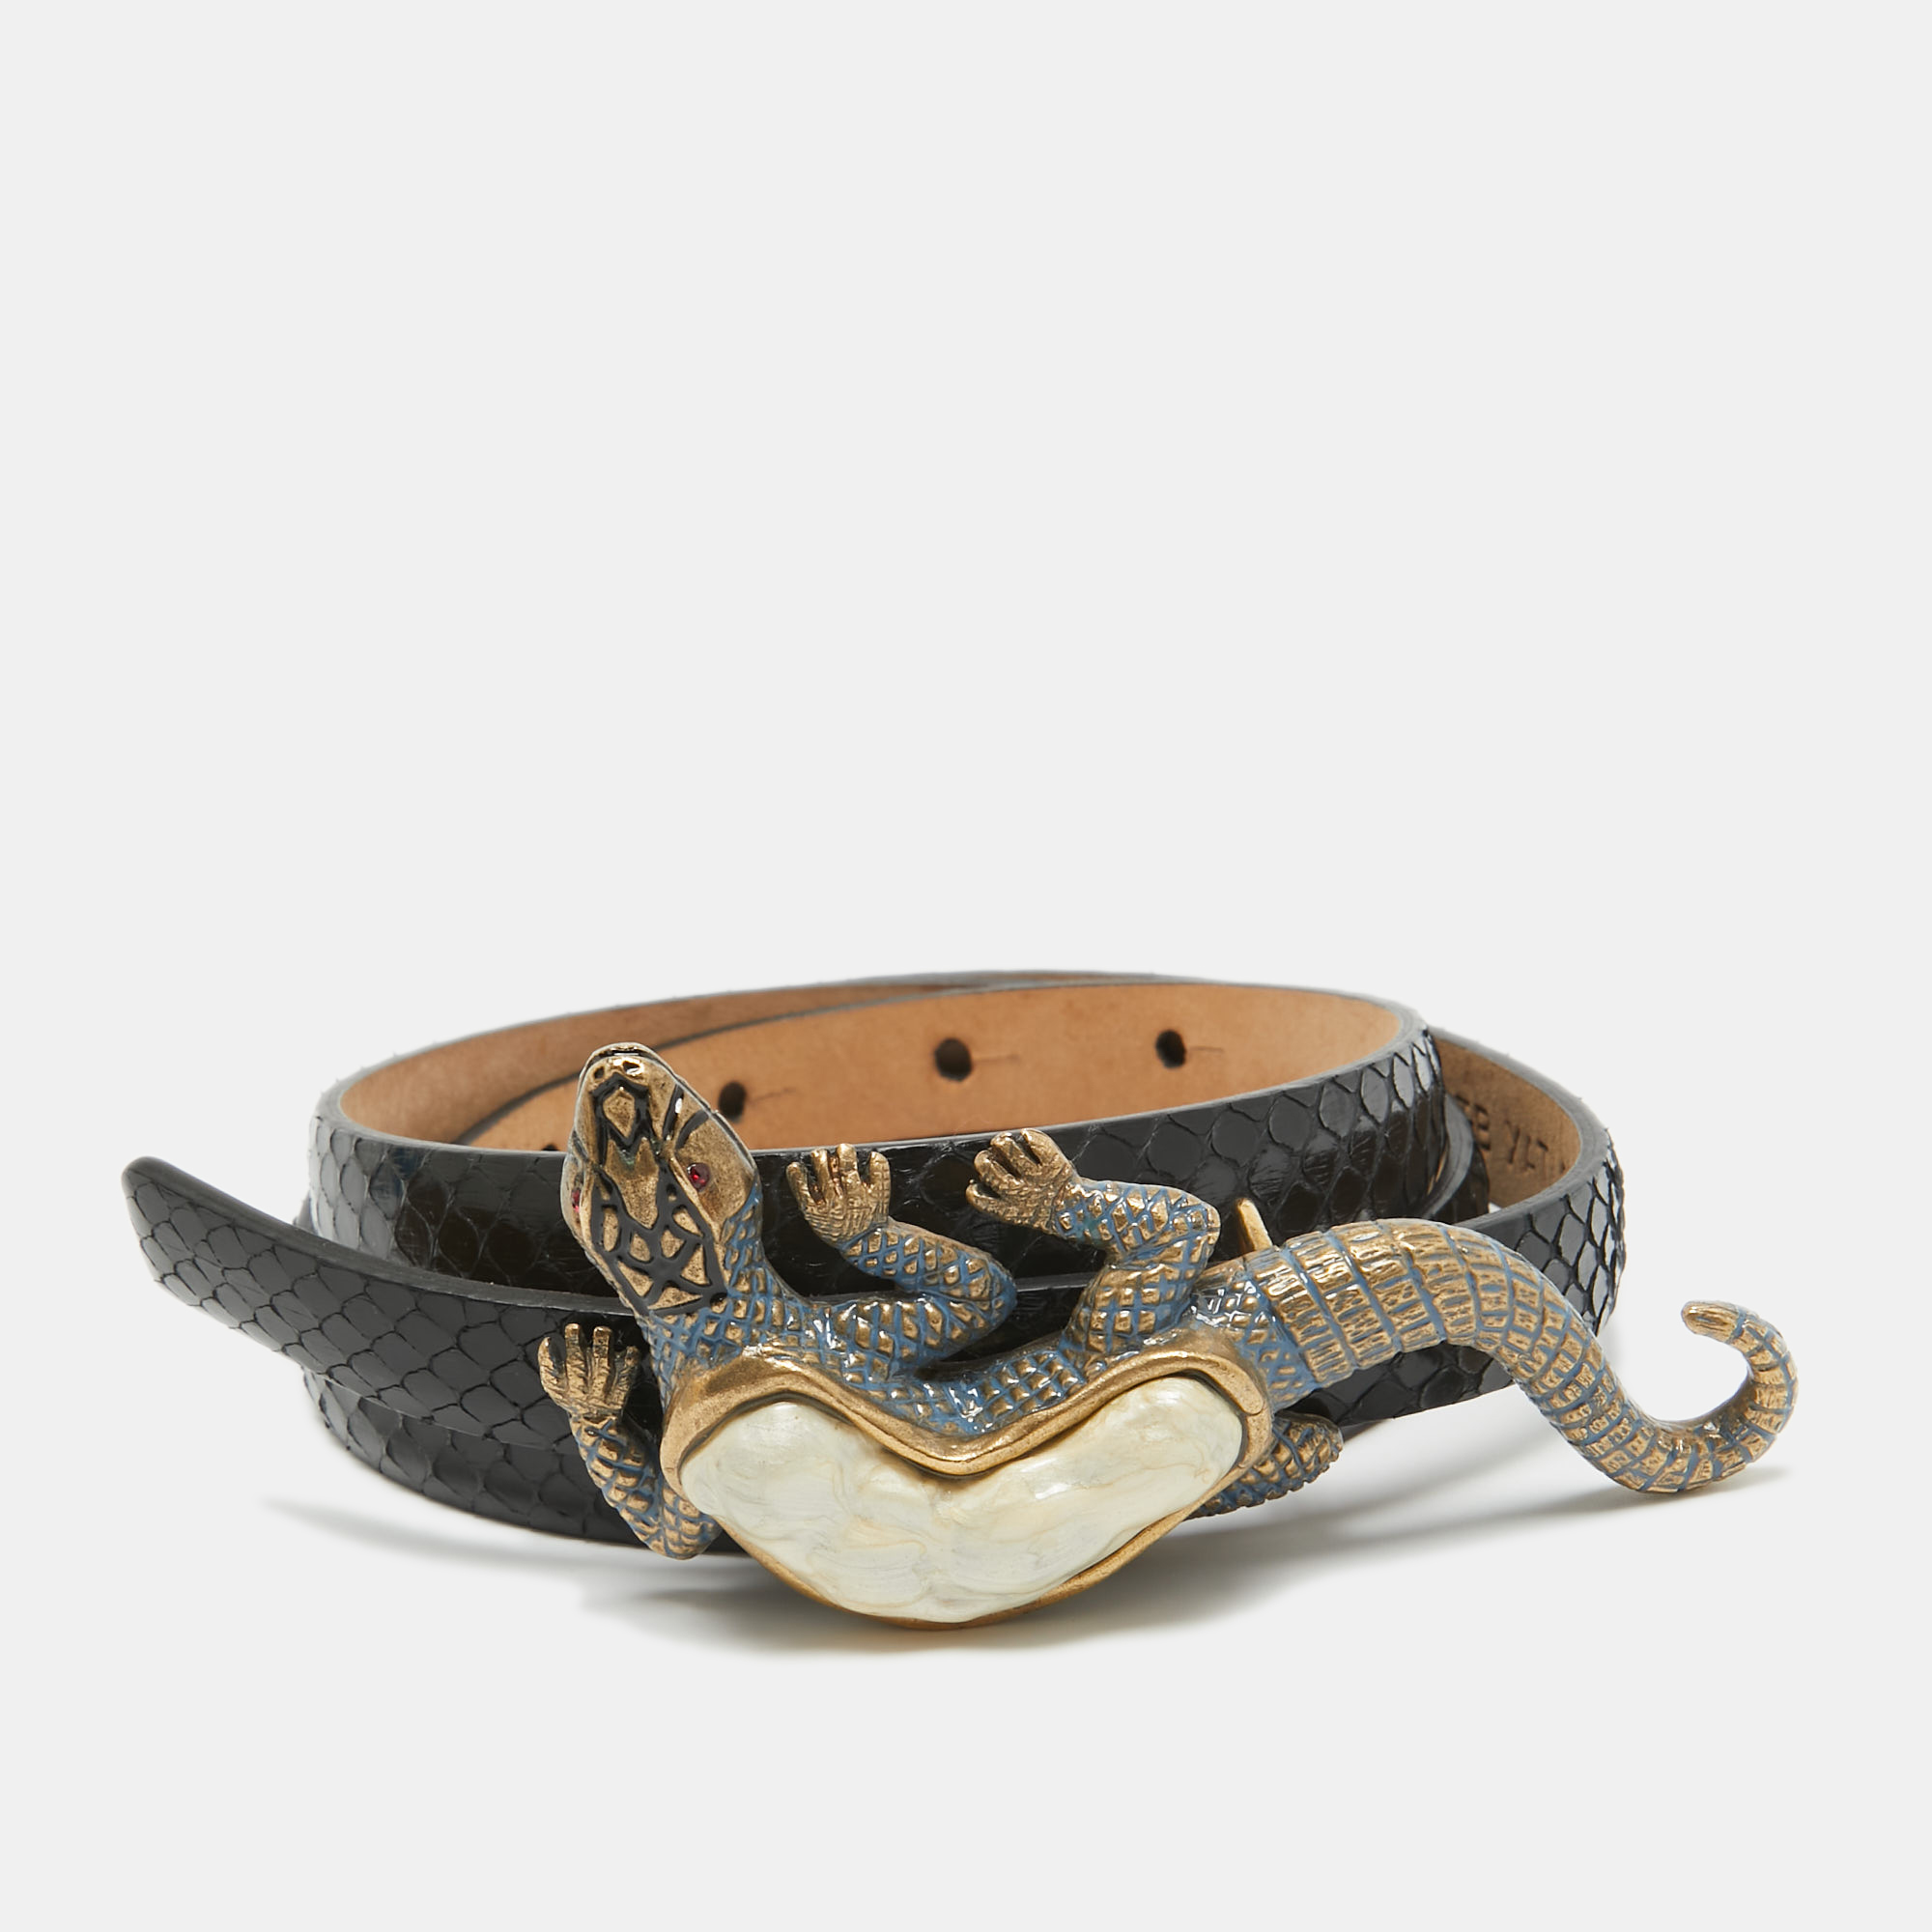 Accessorize like a fashionista using this Lizard Buckle Belt by Valentino. The piece is crafted from watersnake leather in a classy black hue and completed with a gold tone snake buckle that stands out owing to its high design.